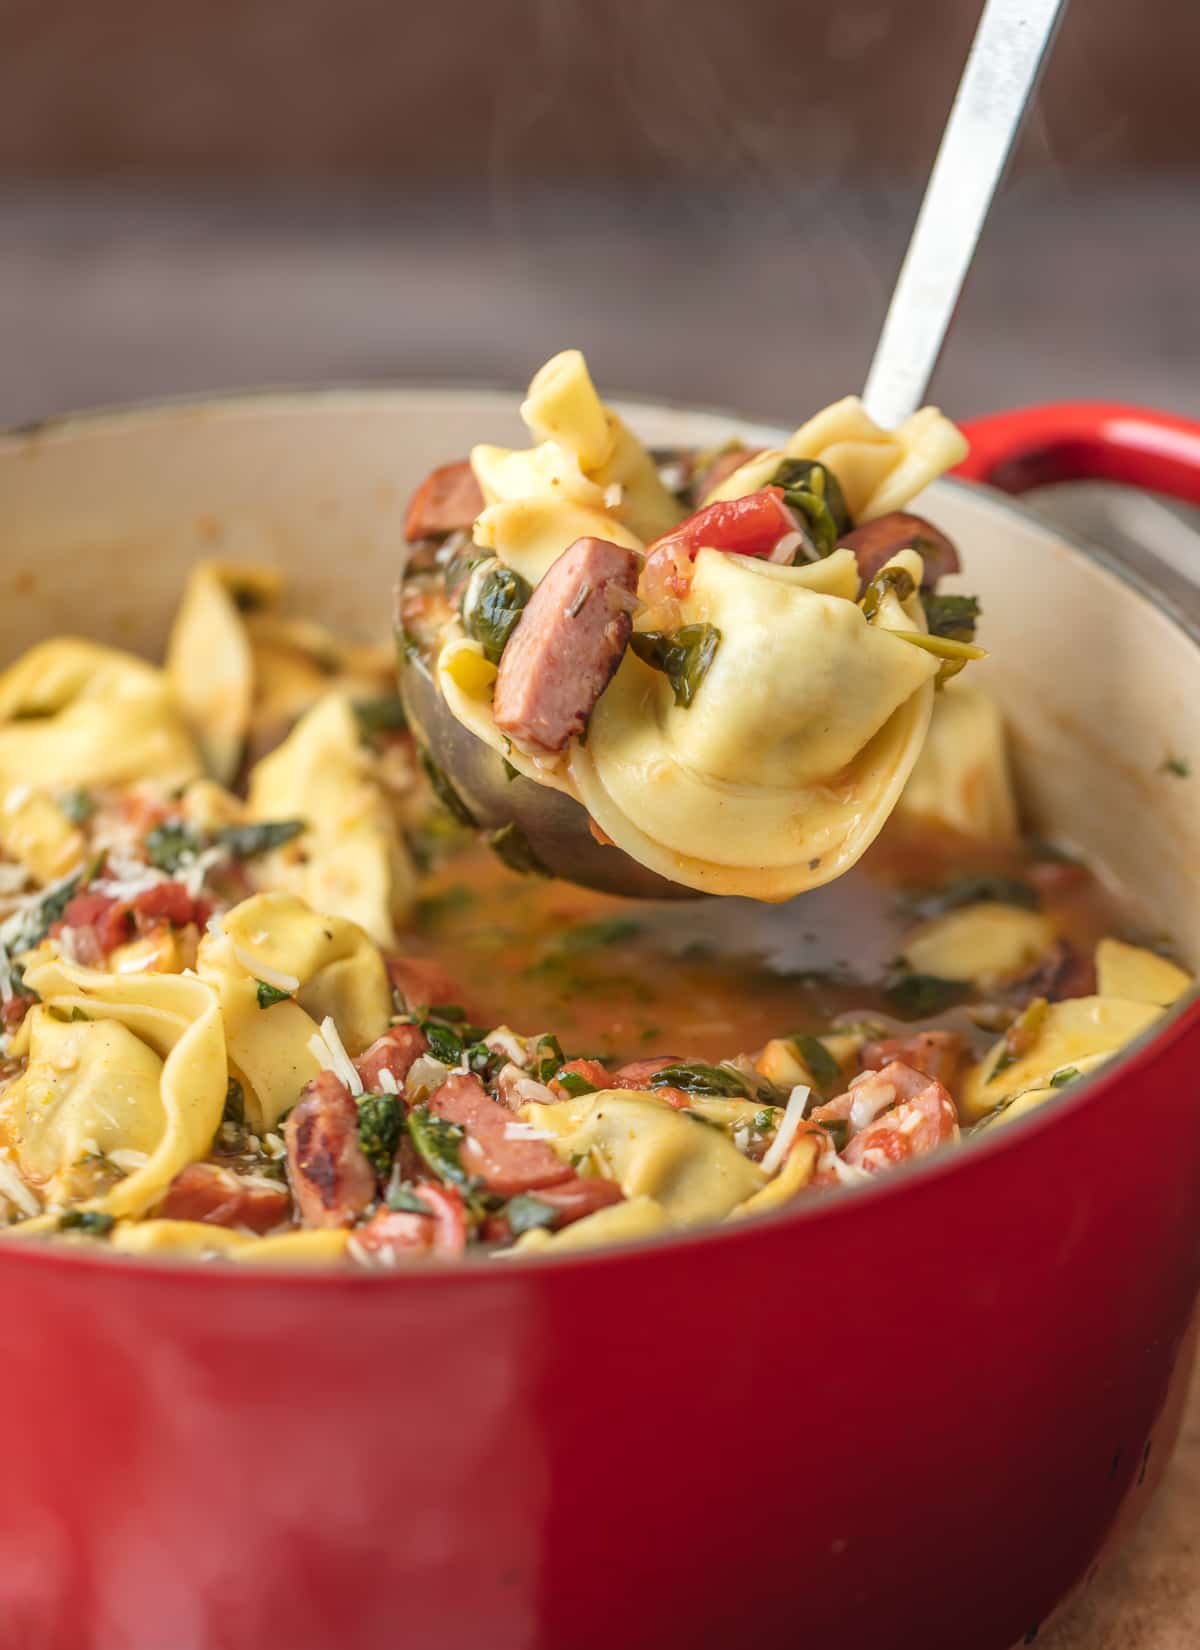 This SWEET ITALIAN SAUSAGE TORTELLINI SOUP is such an easy and delicious soup to throw together on busy days. Loaded with flavor while being kind to your waistline. I love it!